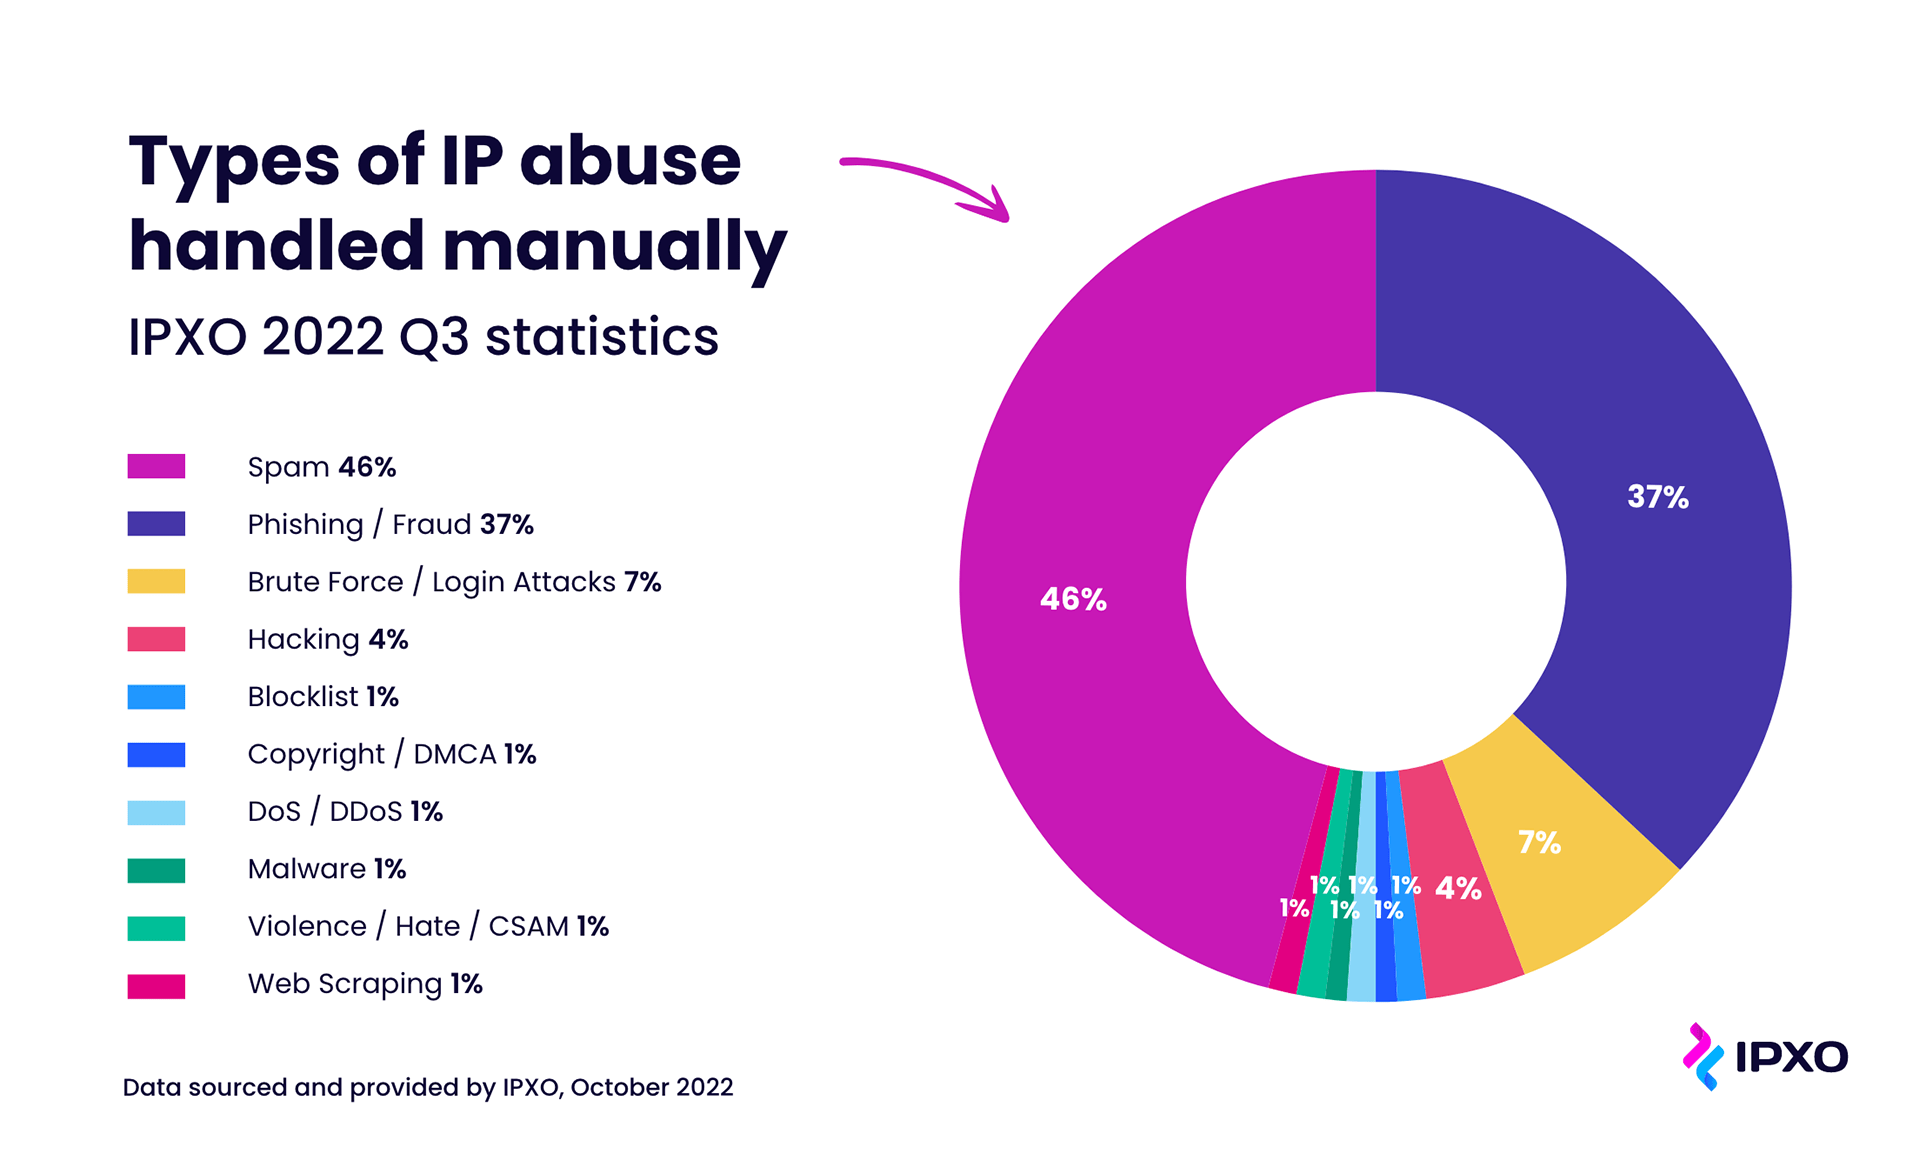 Types of IP Abuse Handled Manually, ARIN Q3 2022